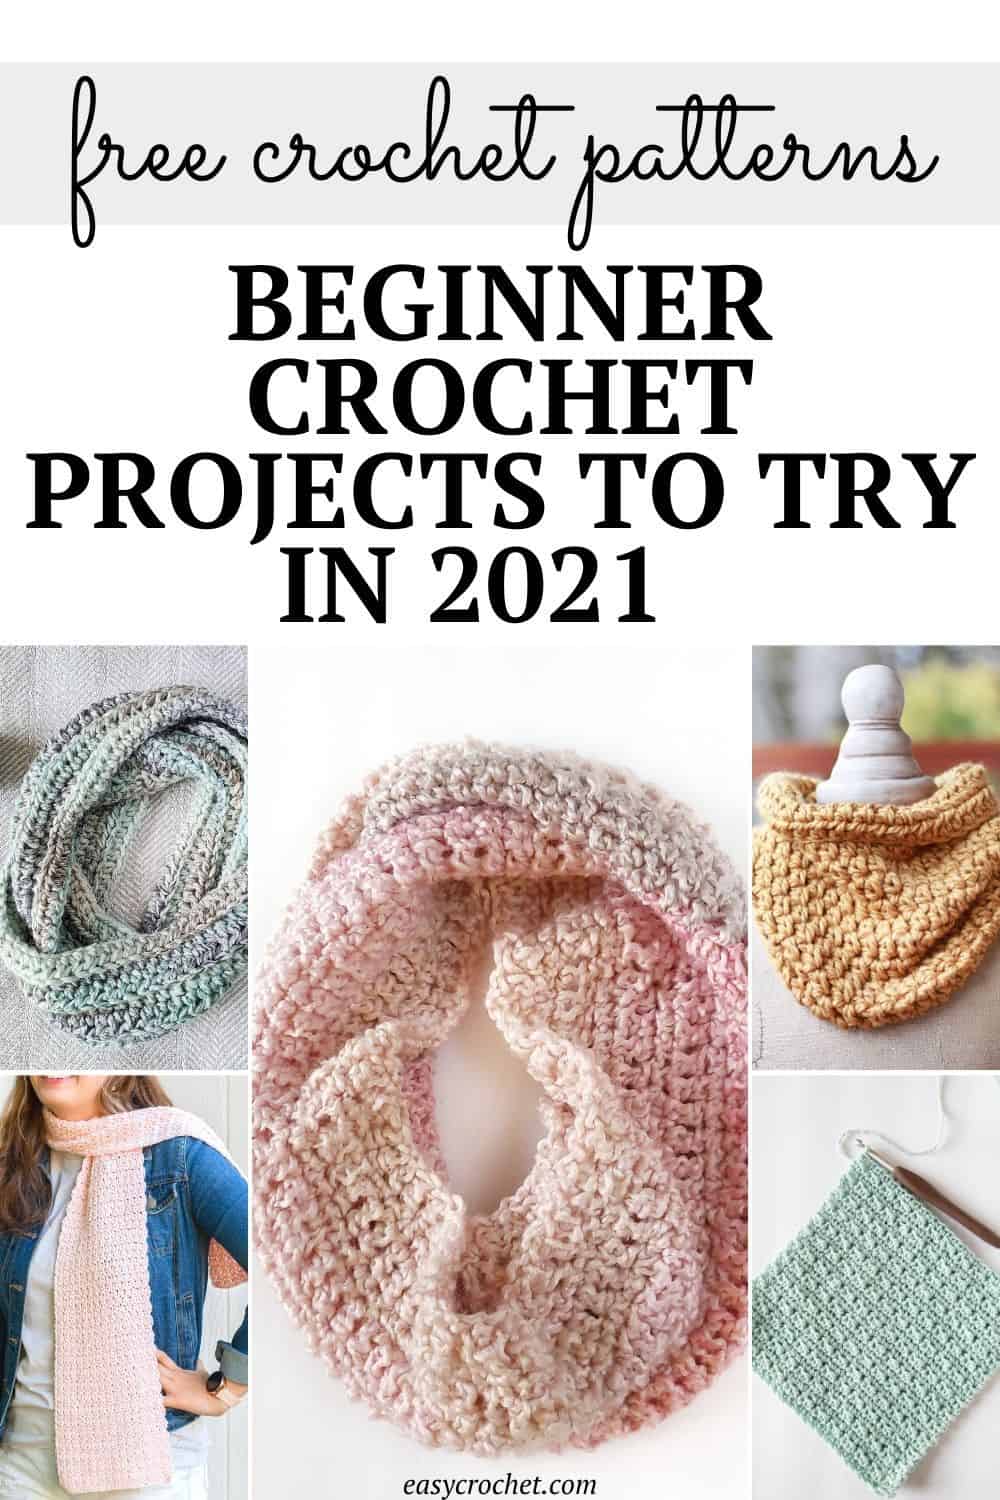 Must make beginner crochet projects for 2021! All free crochet patterns such as blankets, cowls, and more! via @easycrochetcom